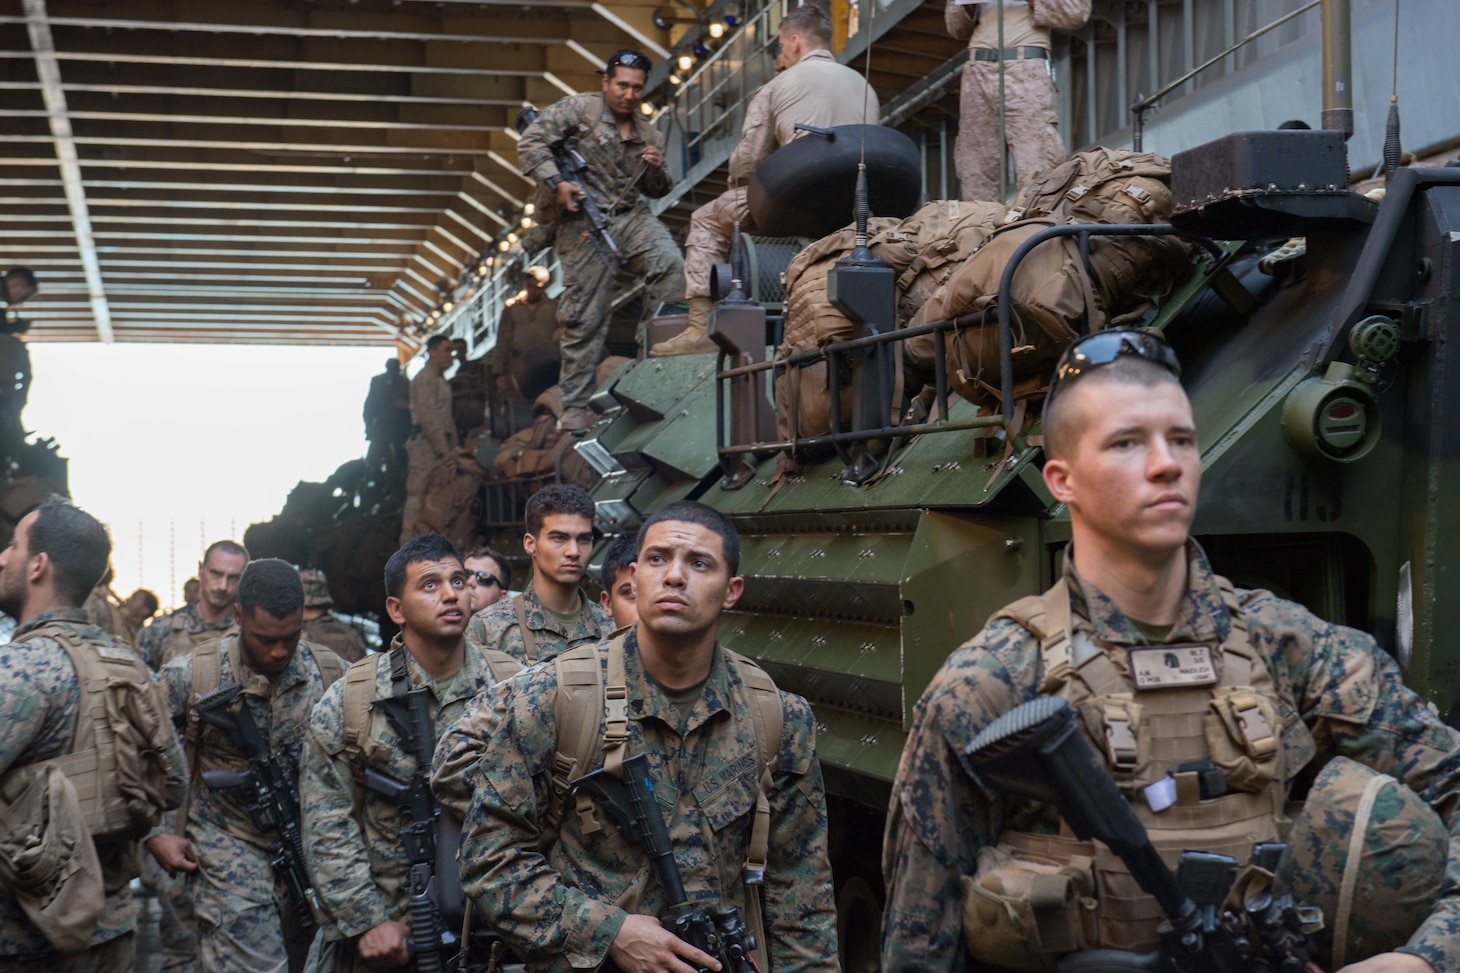 170715-N-UX013-530 CORAL SEA (July 15, 2017) Marines attached to the 31st Marine Expeditionary Unit (MEU) embark the amphibious dock landing ship USS Ashland (LSD 48) after conducting a large-scale amphibious assault during exercise during Talisman Saber 17. Talisman Saber is a biennial U.S.-Australia bilateral exercise held off the coast of Australia meant to achieve interoperability and strengthen the U.S.-Australia alliance. (U.S. Navy photo by Mass Communication Specialist 3rd Class Jonathan Clay/Released)